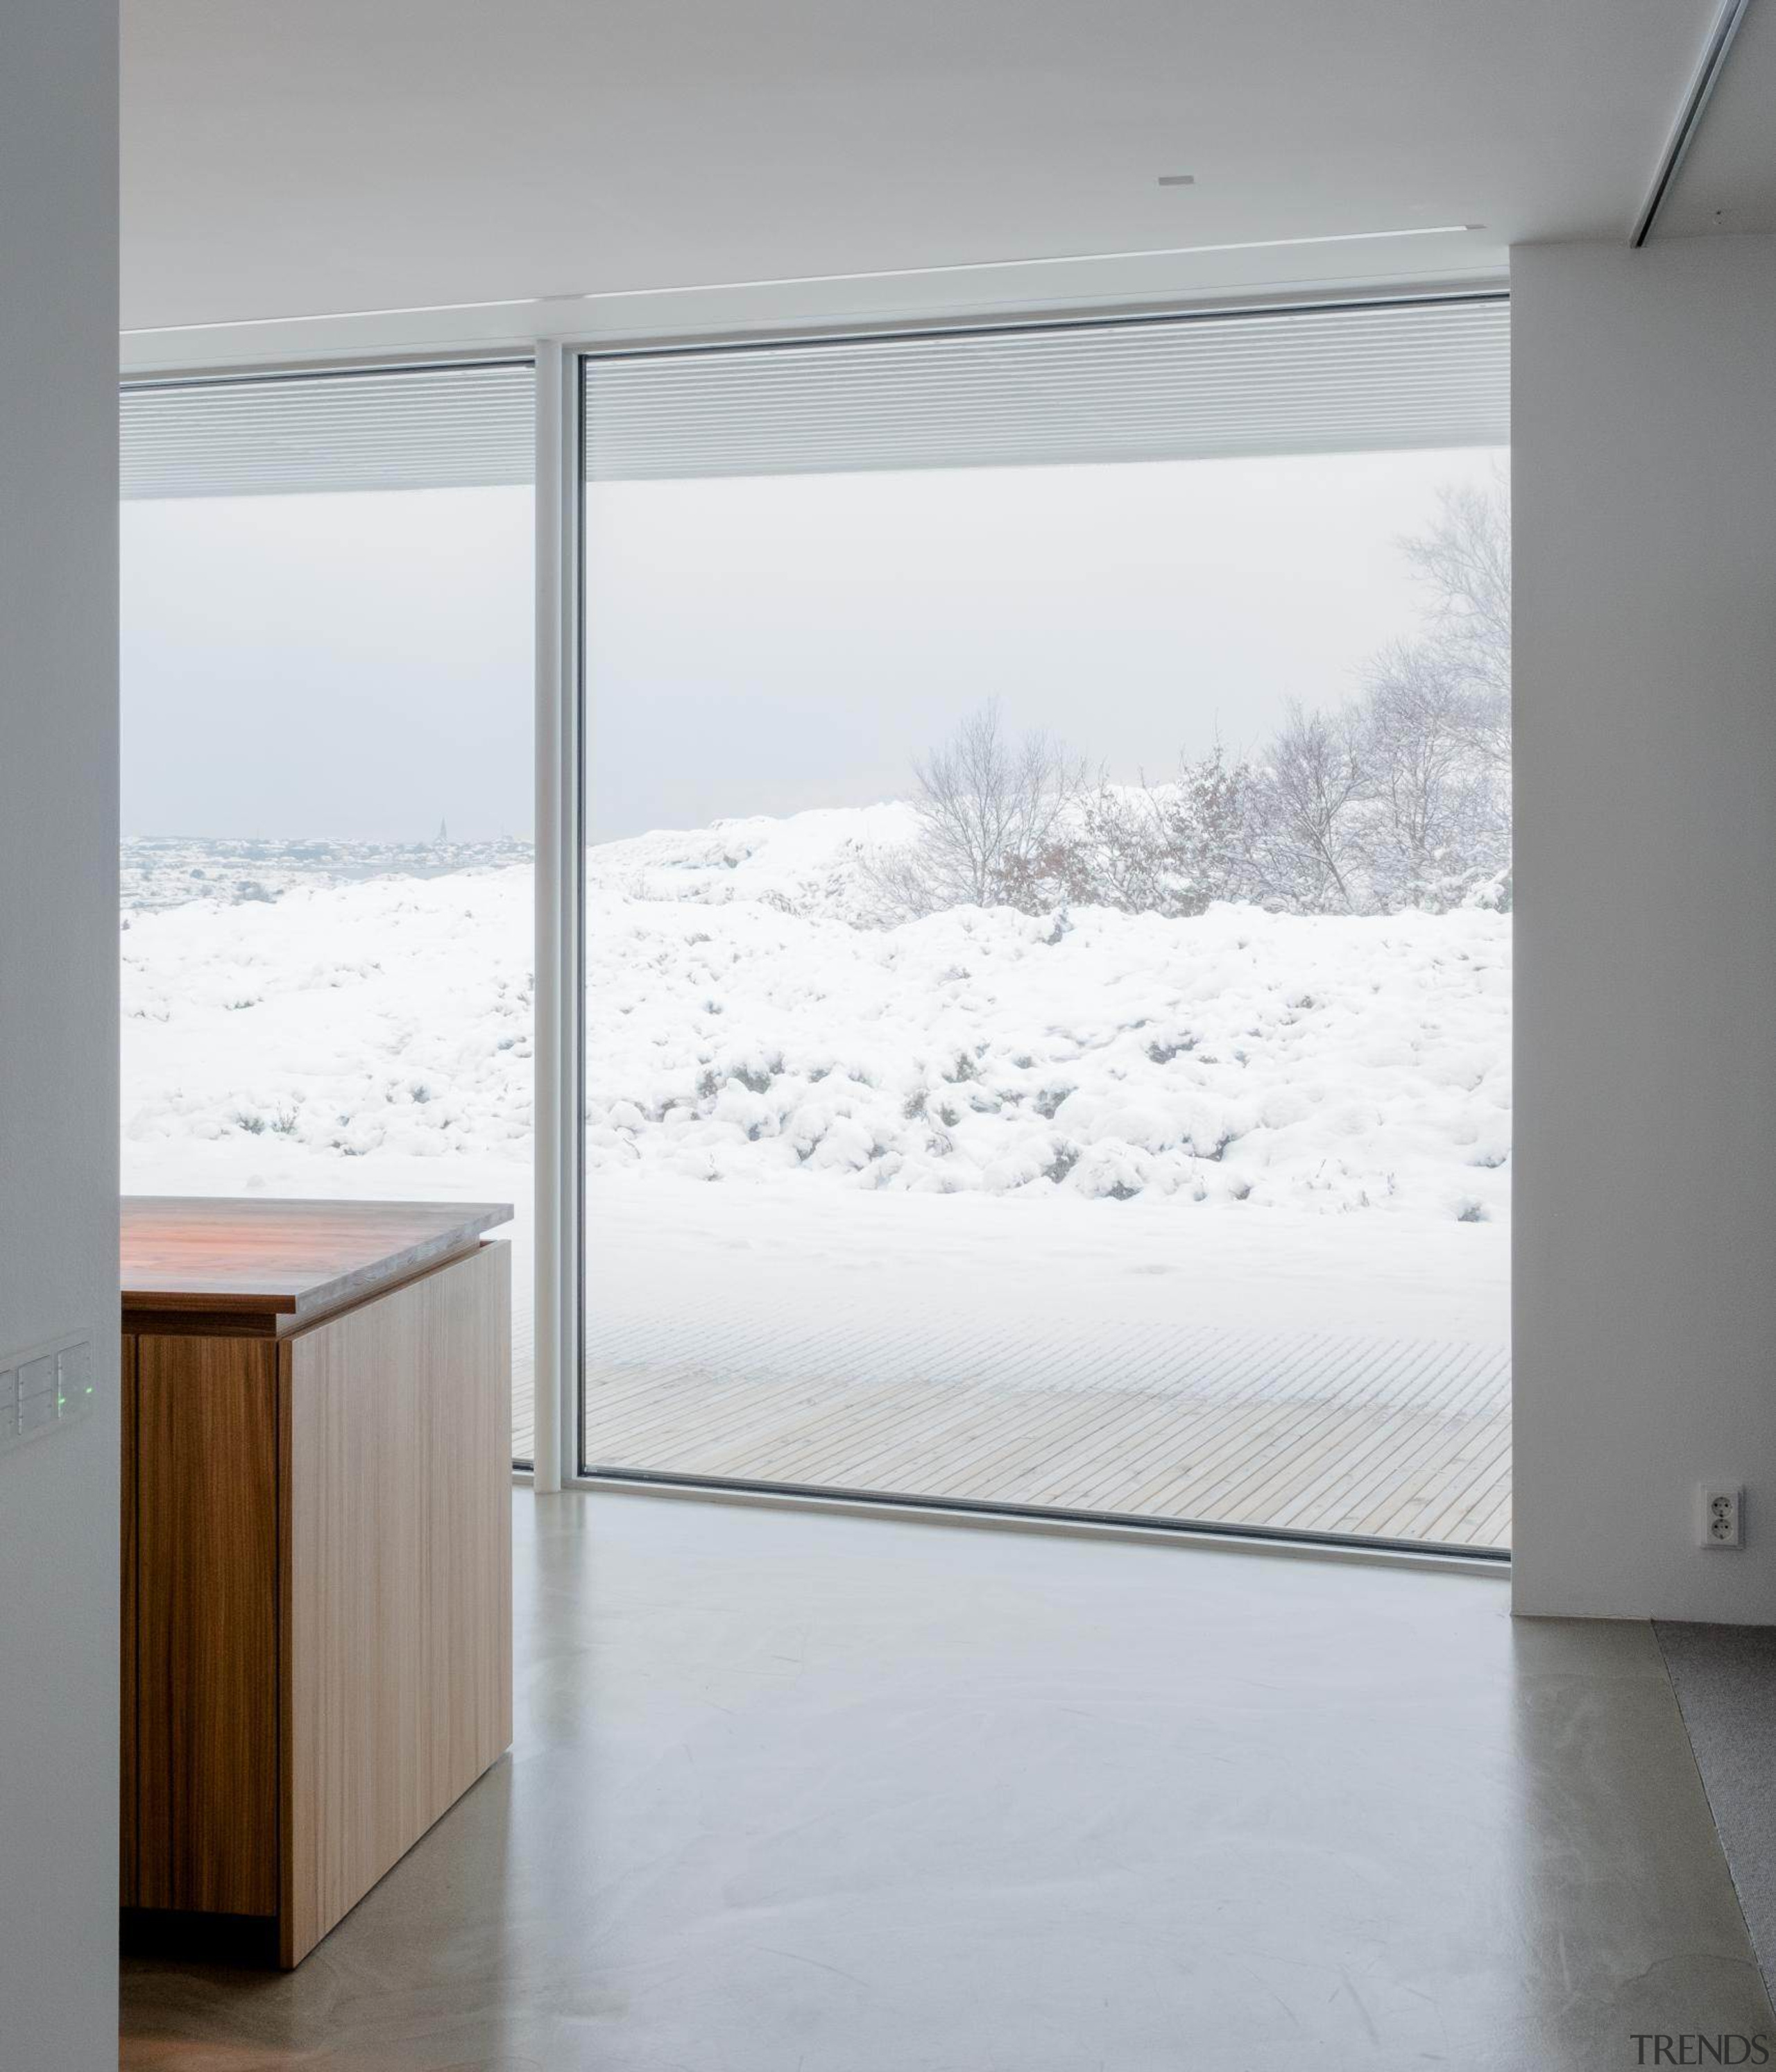 The home seems to hold the winter snow architecture, glass, home, house, interior design, window, white, gray